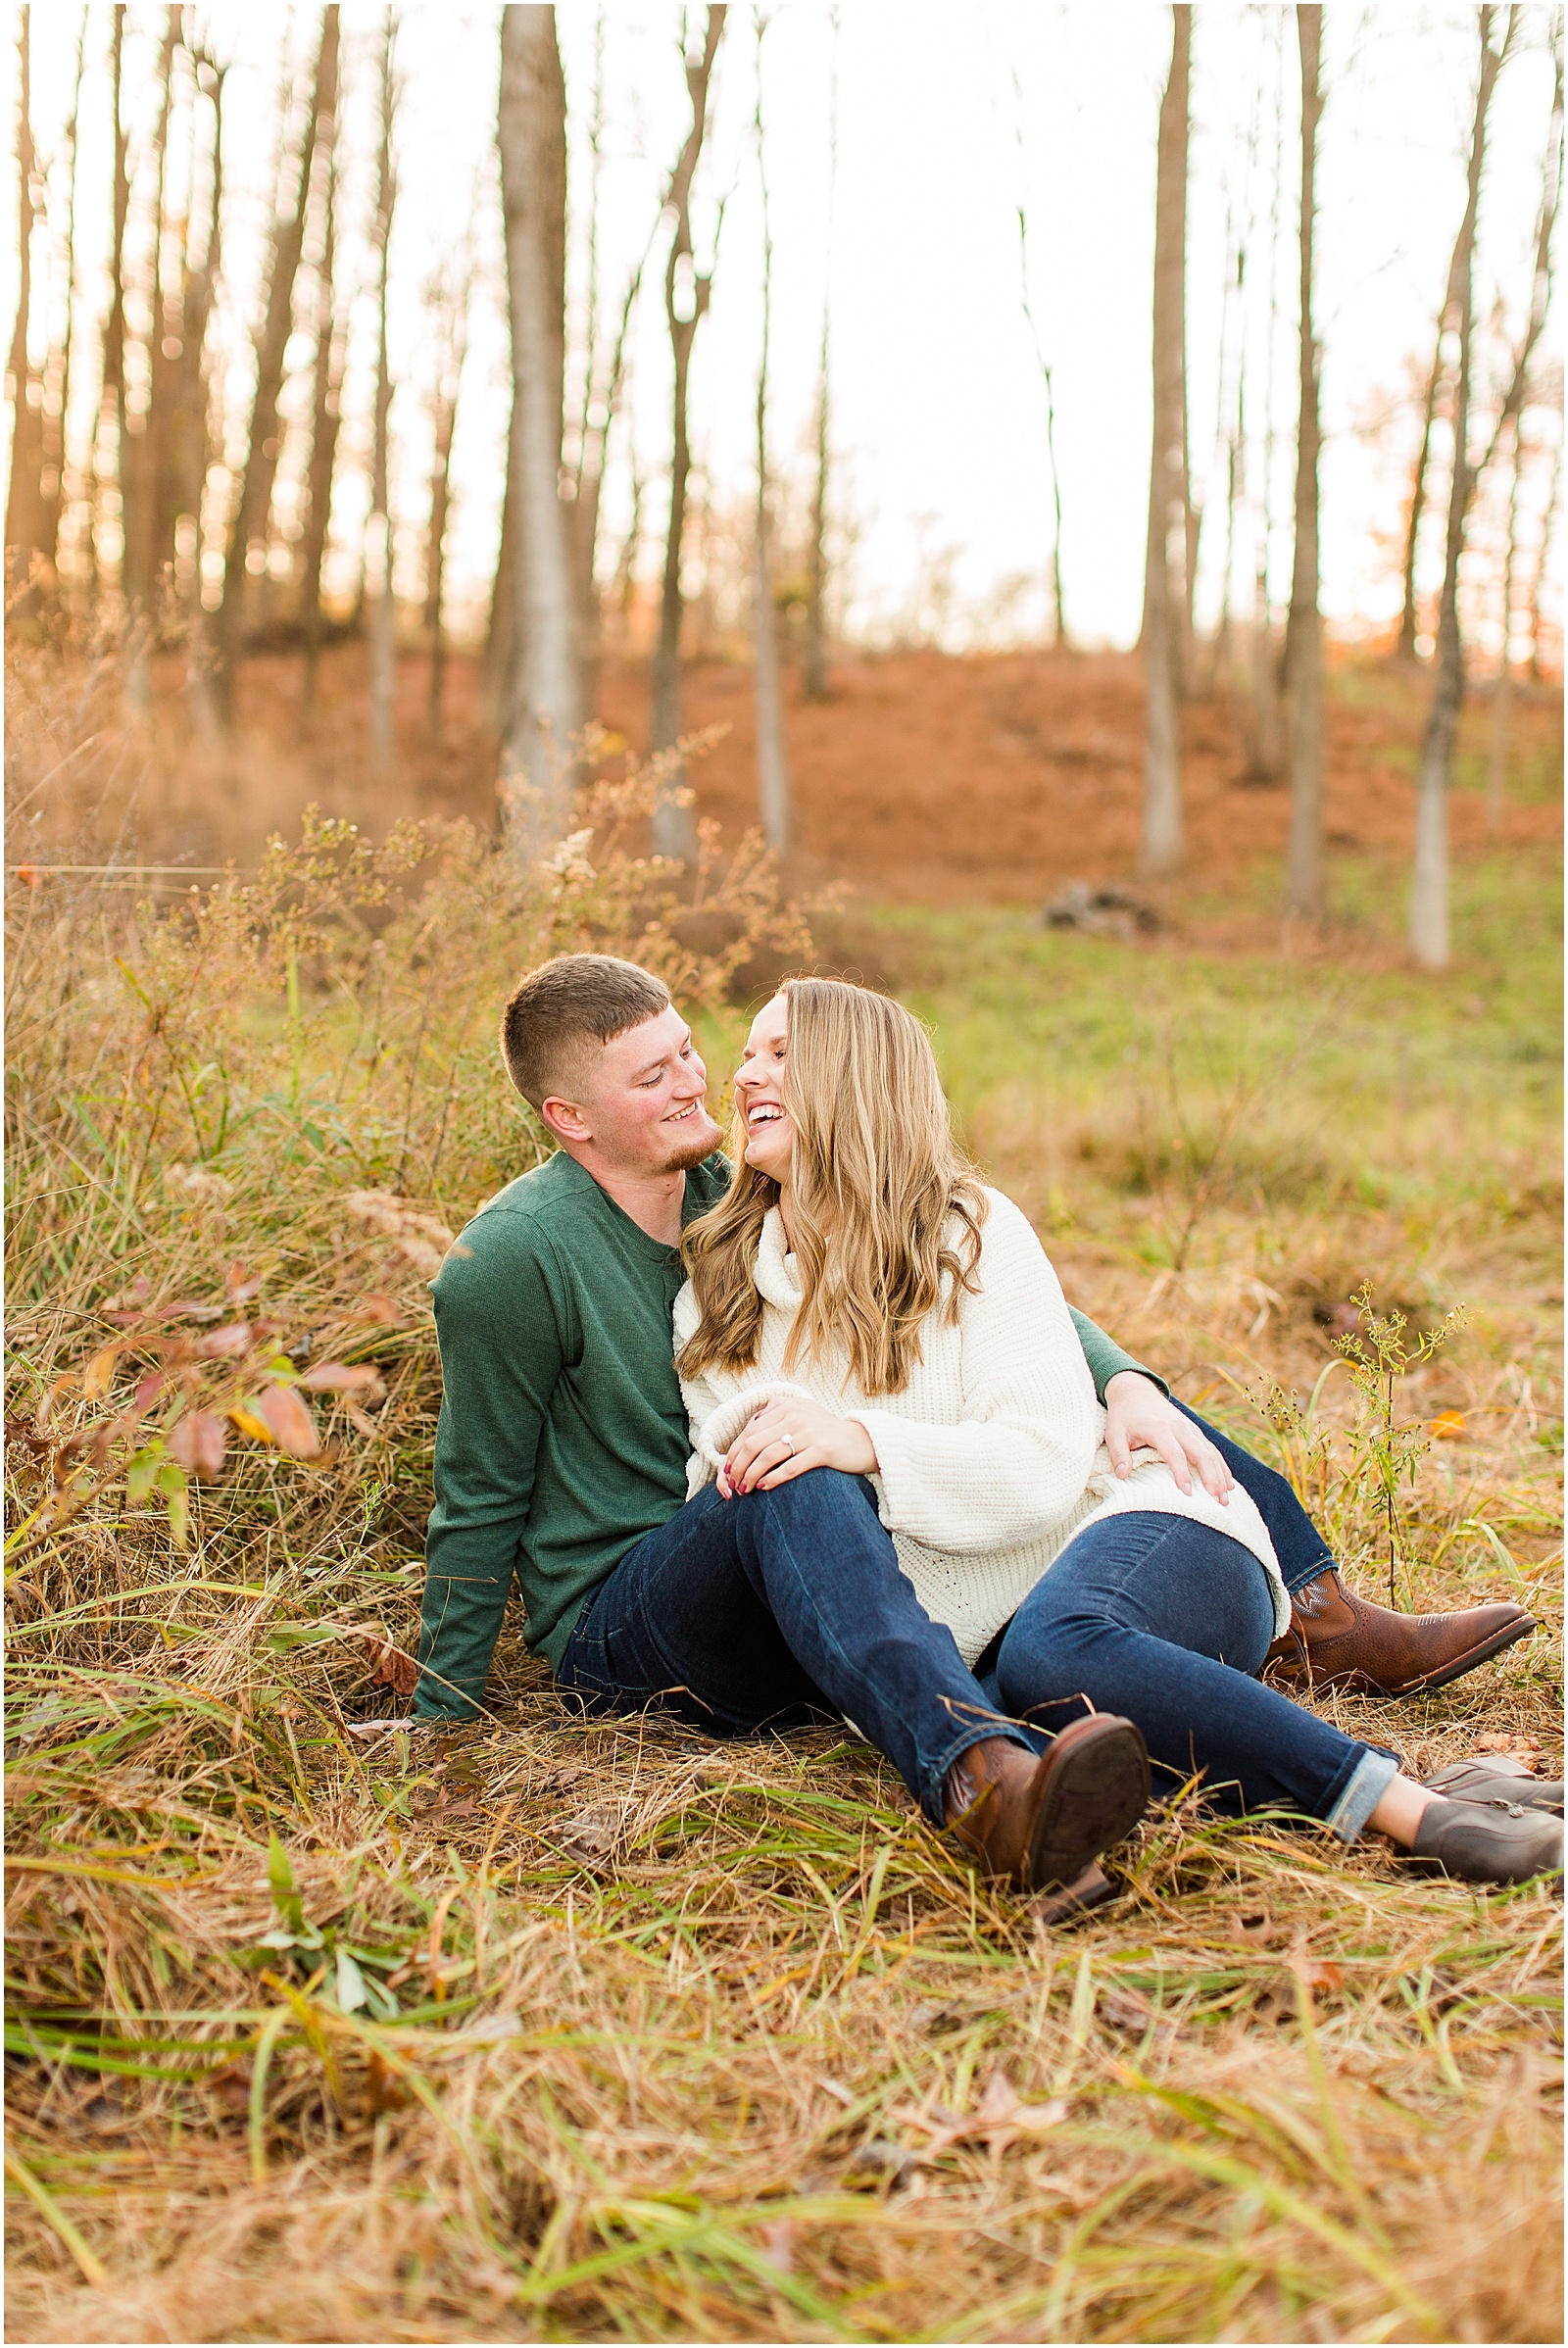 A Fall Southern Indiana Engagement Seesion | Cody and Hannah | Bret and Brandie Photography 035.jpg